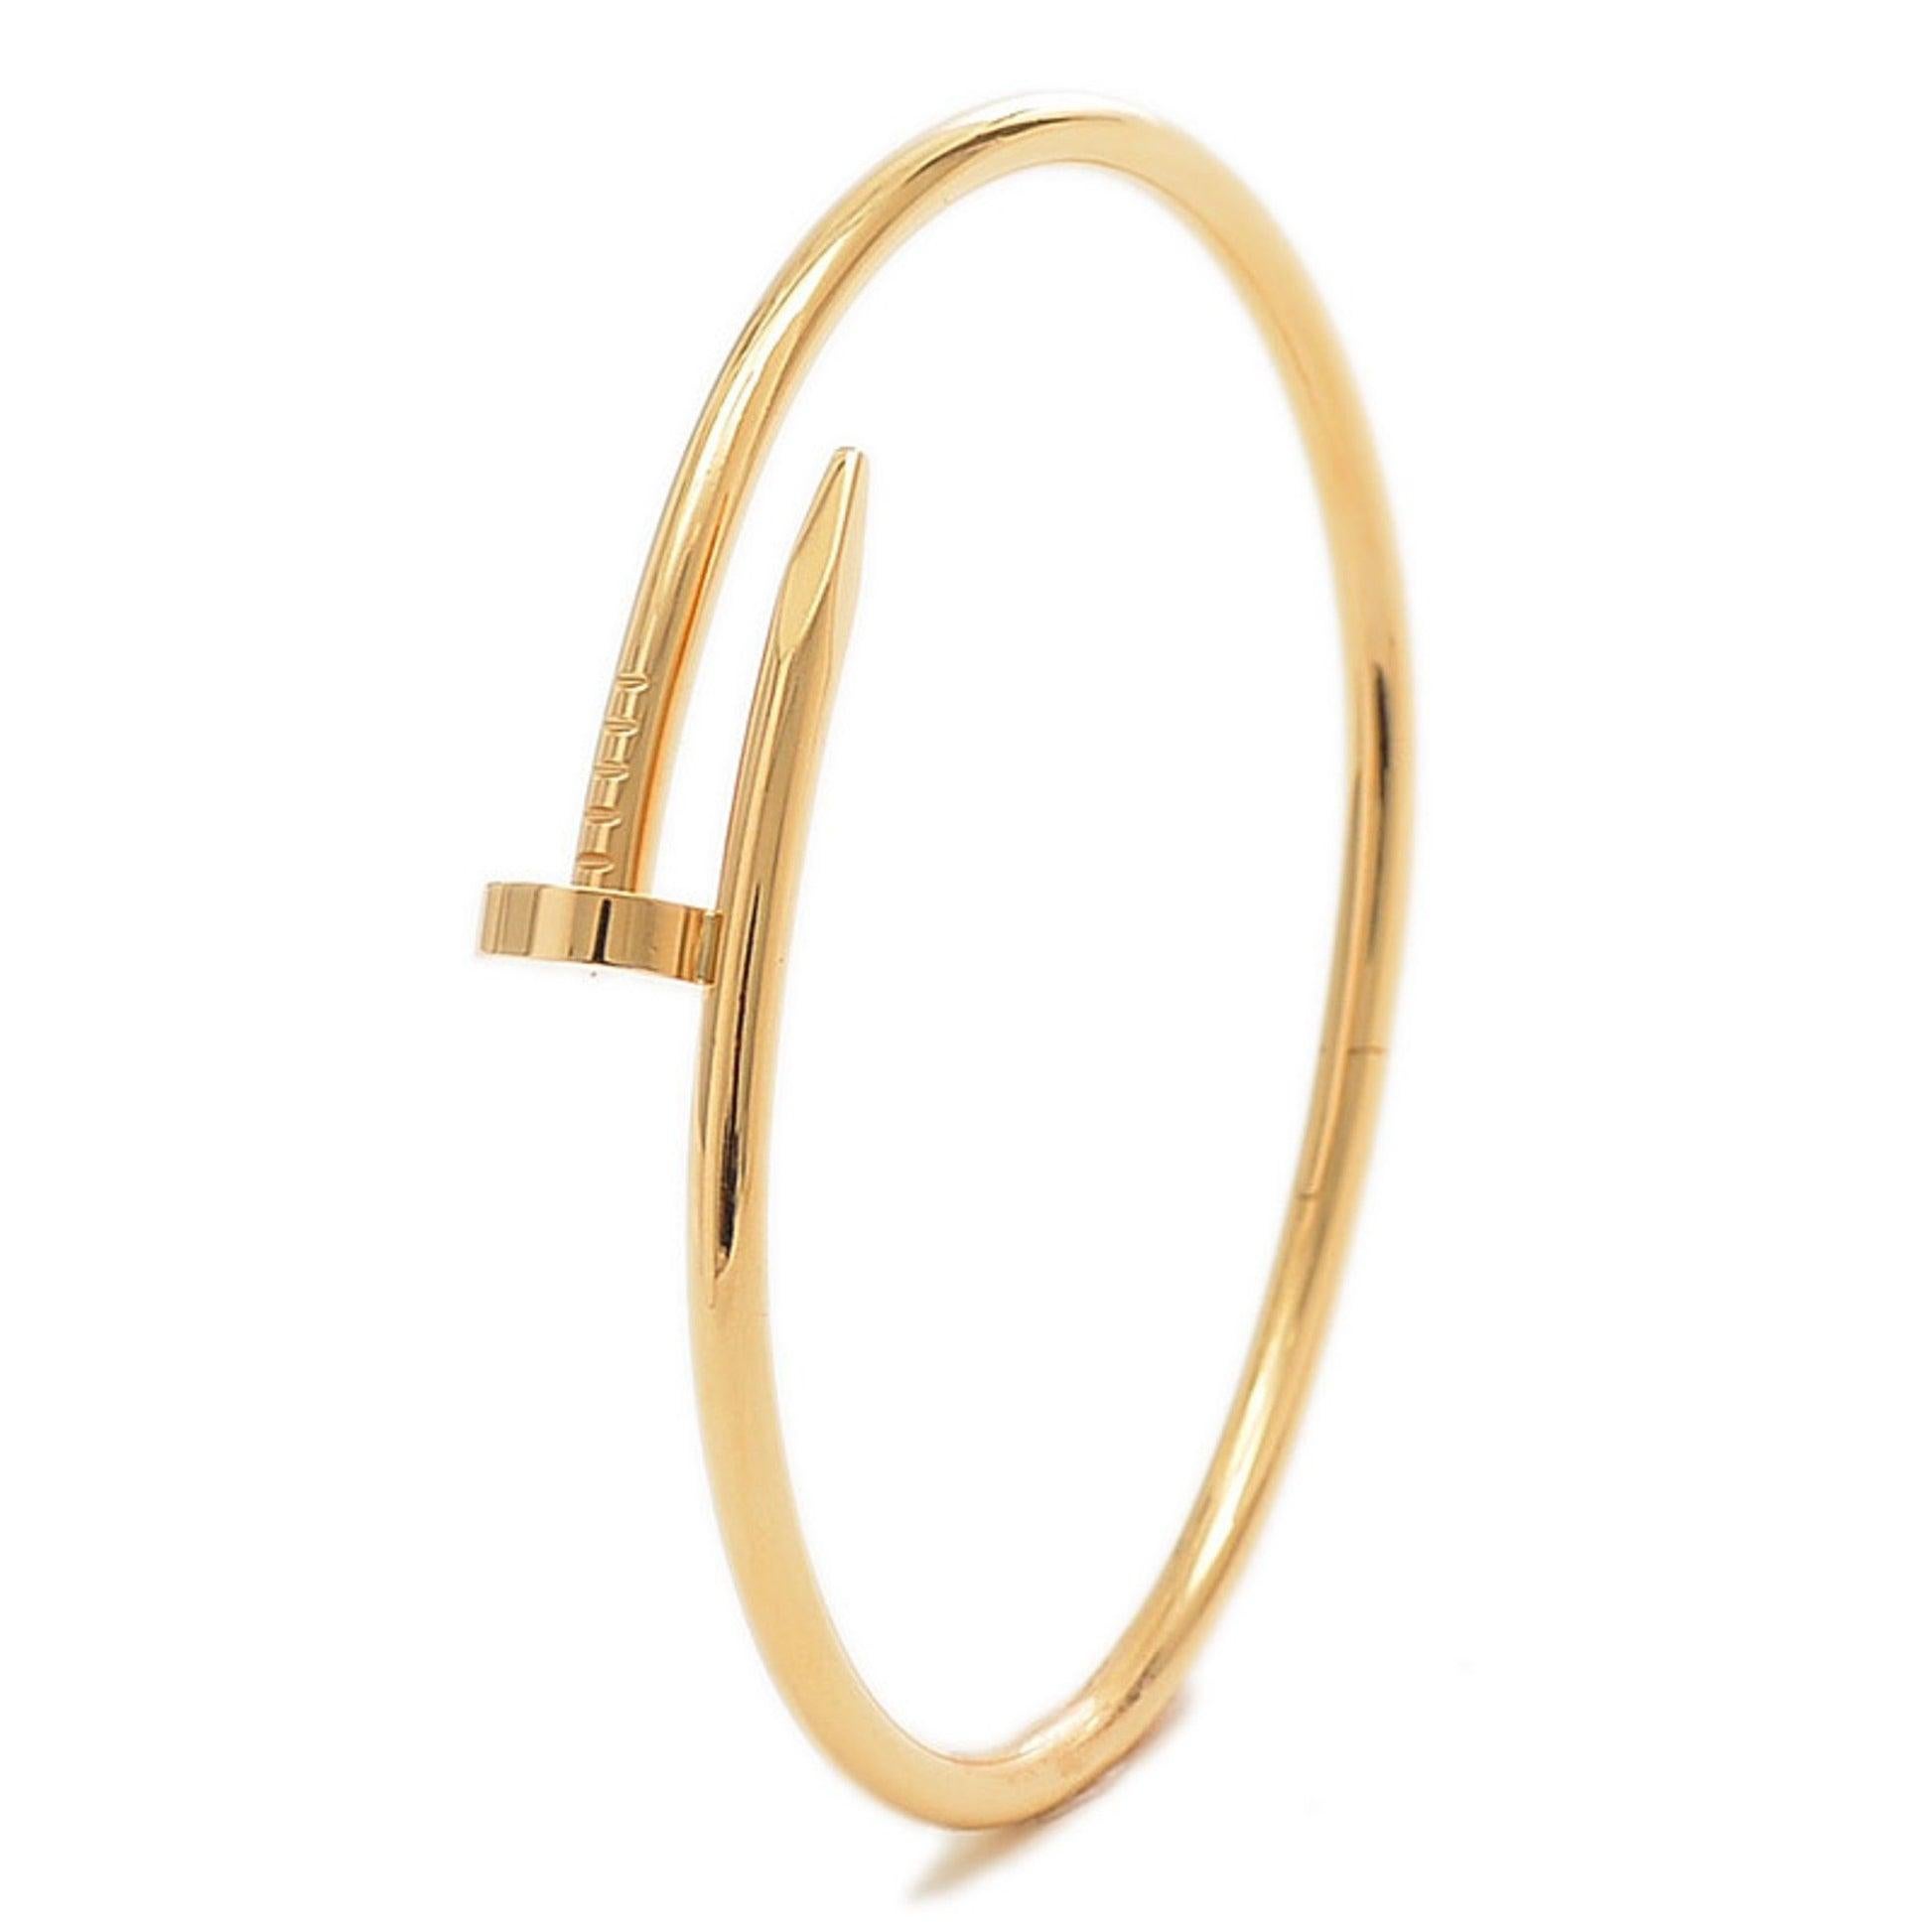 Cartier Just Uncle Bracelet Bangle in 18K Yellow Gold

Additional Information:
Brand: Cartier
Gender: Men,Women
Color: Yellow gold
Material: Yellow gold (18K)
Condition details: This item has been used and may have some minor flaws. Before